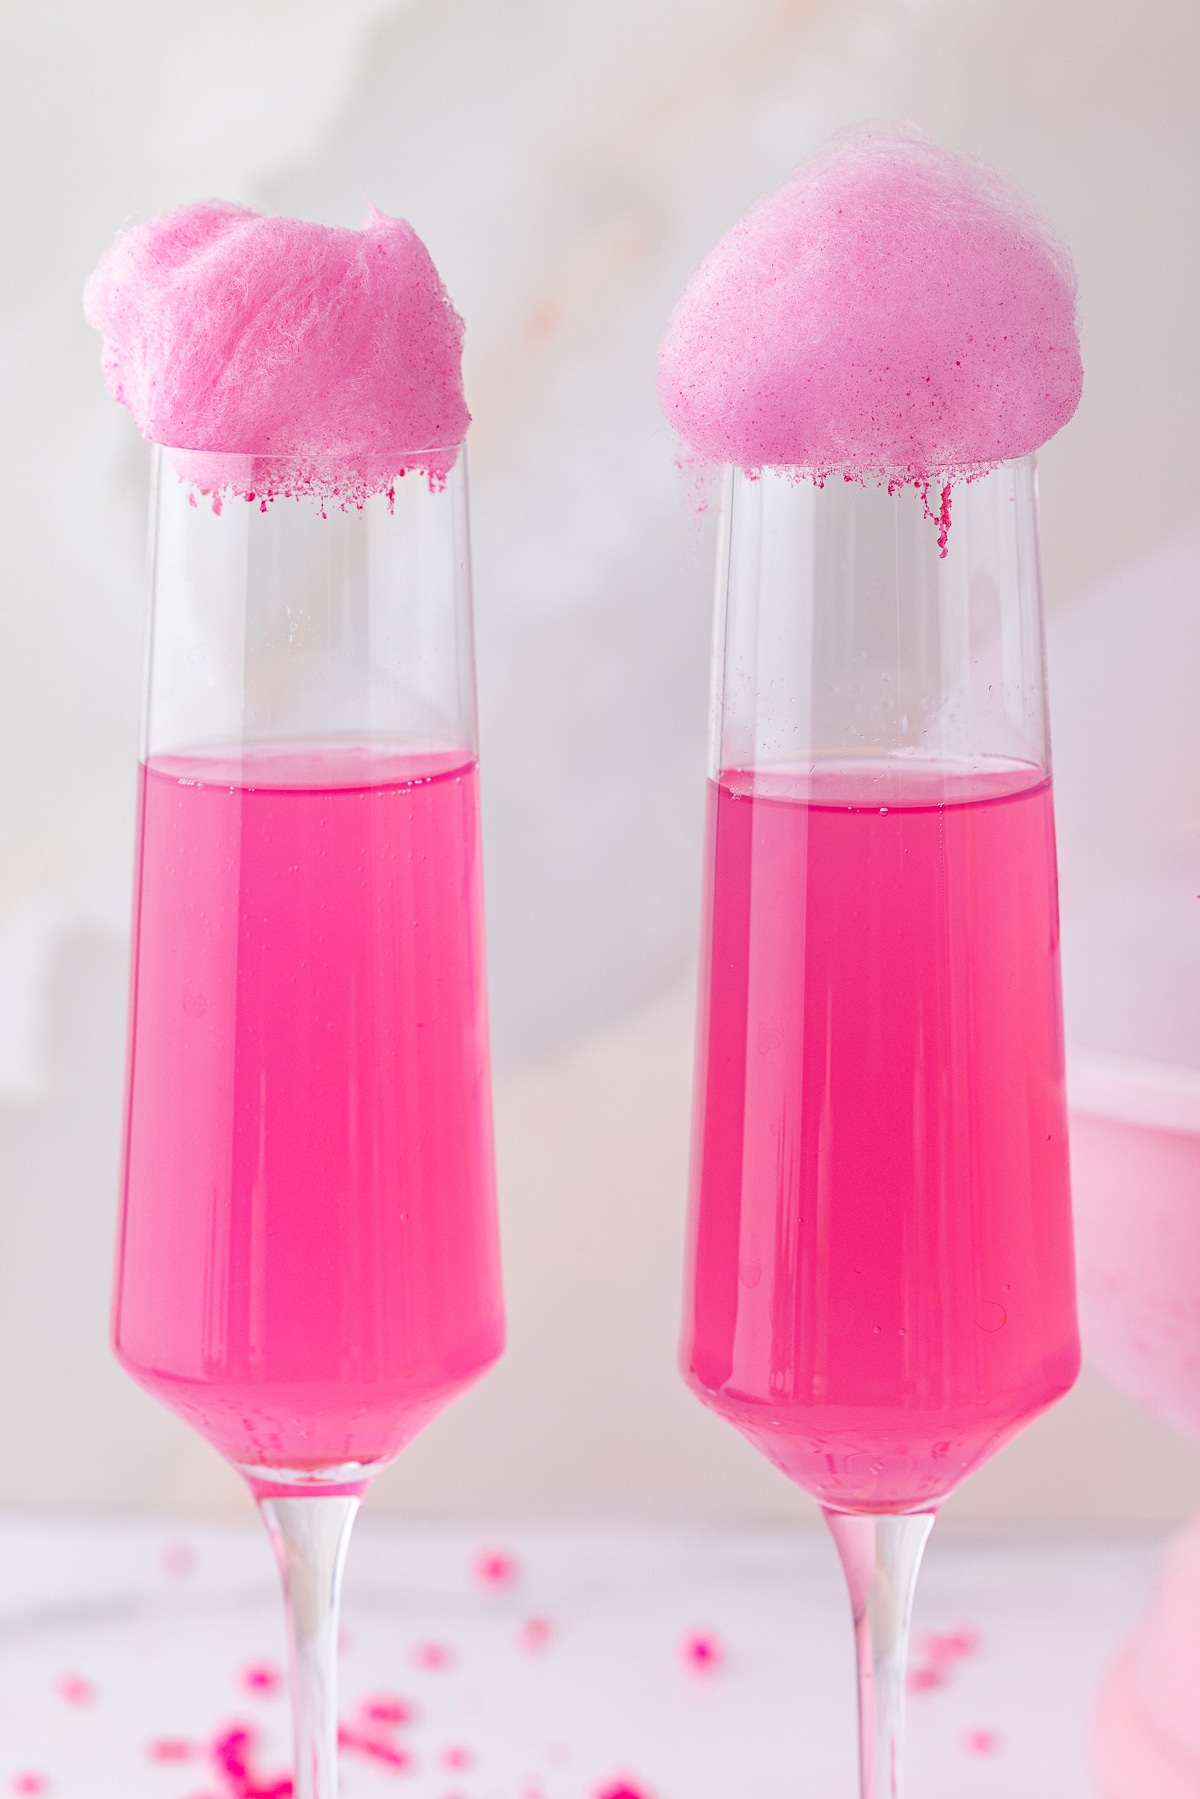 closeup of pink cotton candy over a pink champagne flute